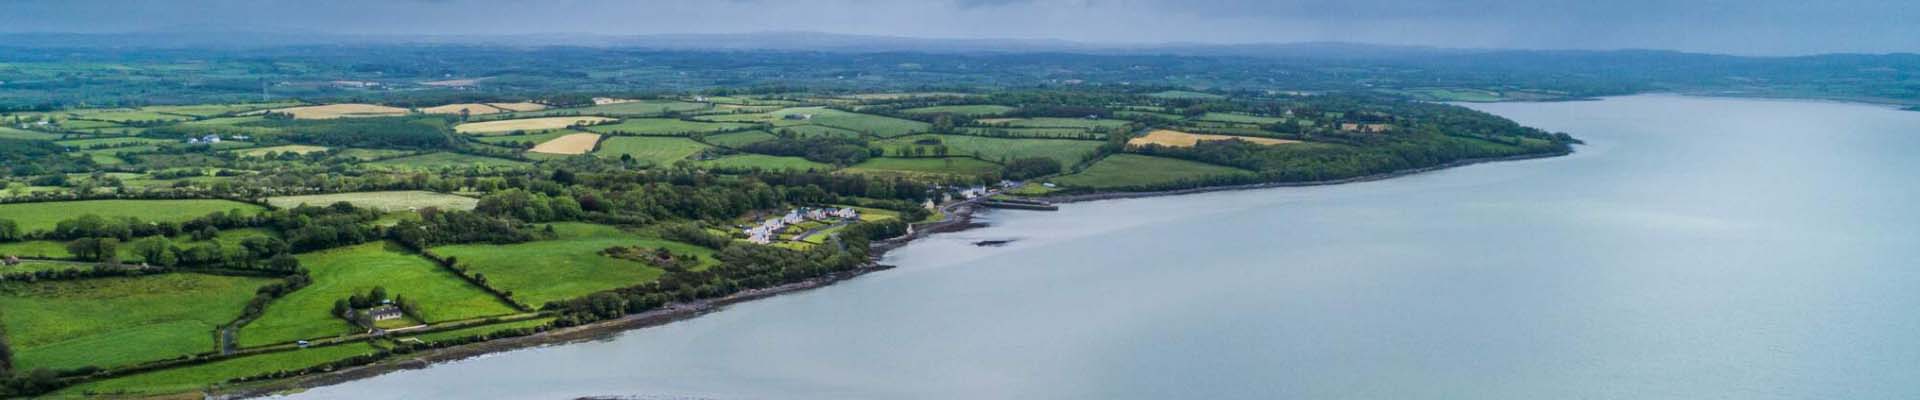 rent a car and drive the shannon estuary drive in the West of Ireland